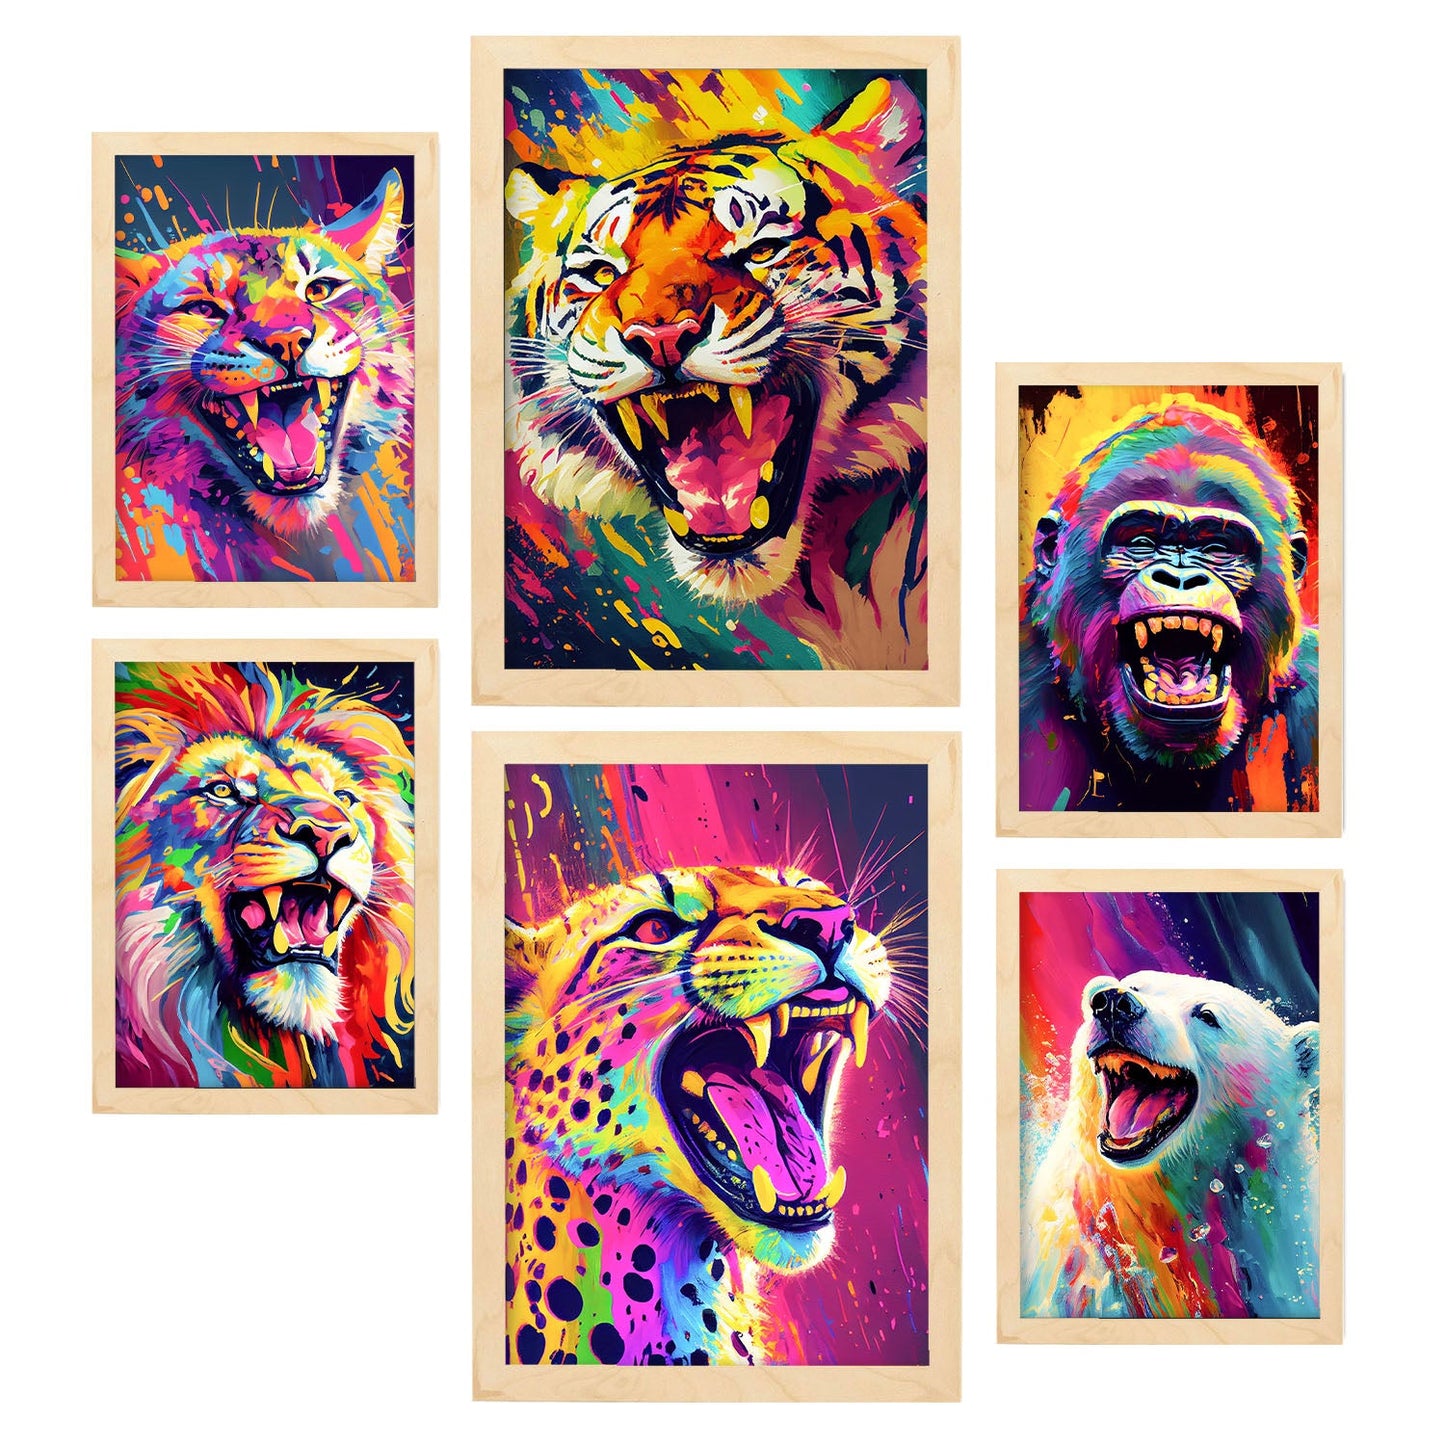 Nacnic Abstract Animal Set_6. Aesthetic Wall Art Prints for Bedroom or Living Room Design.